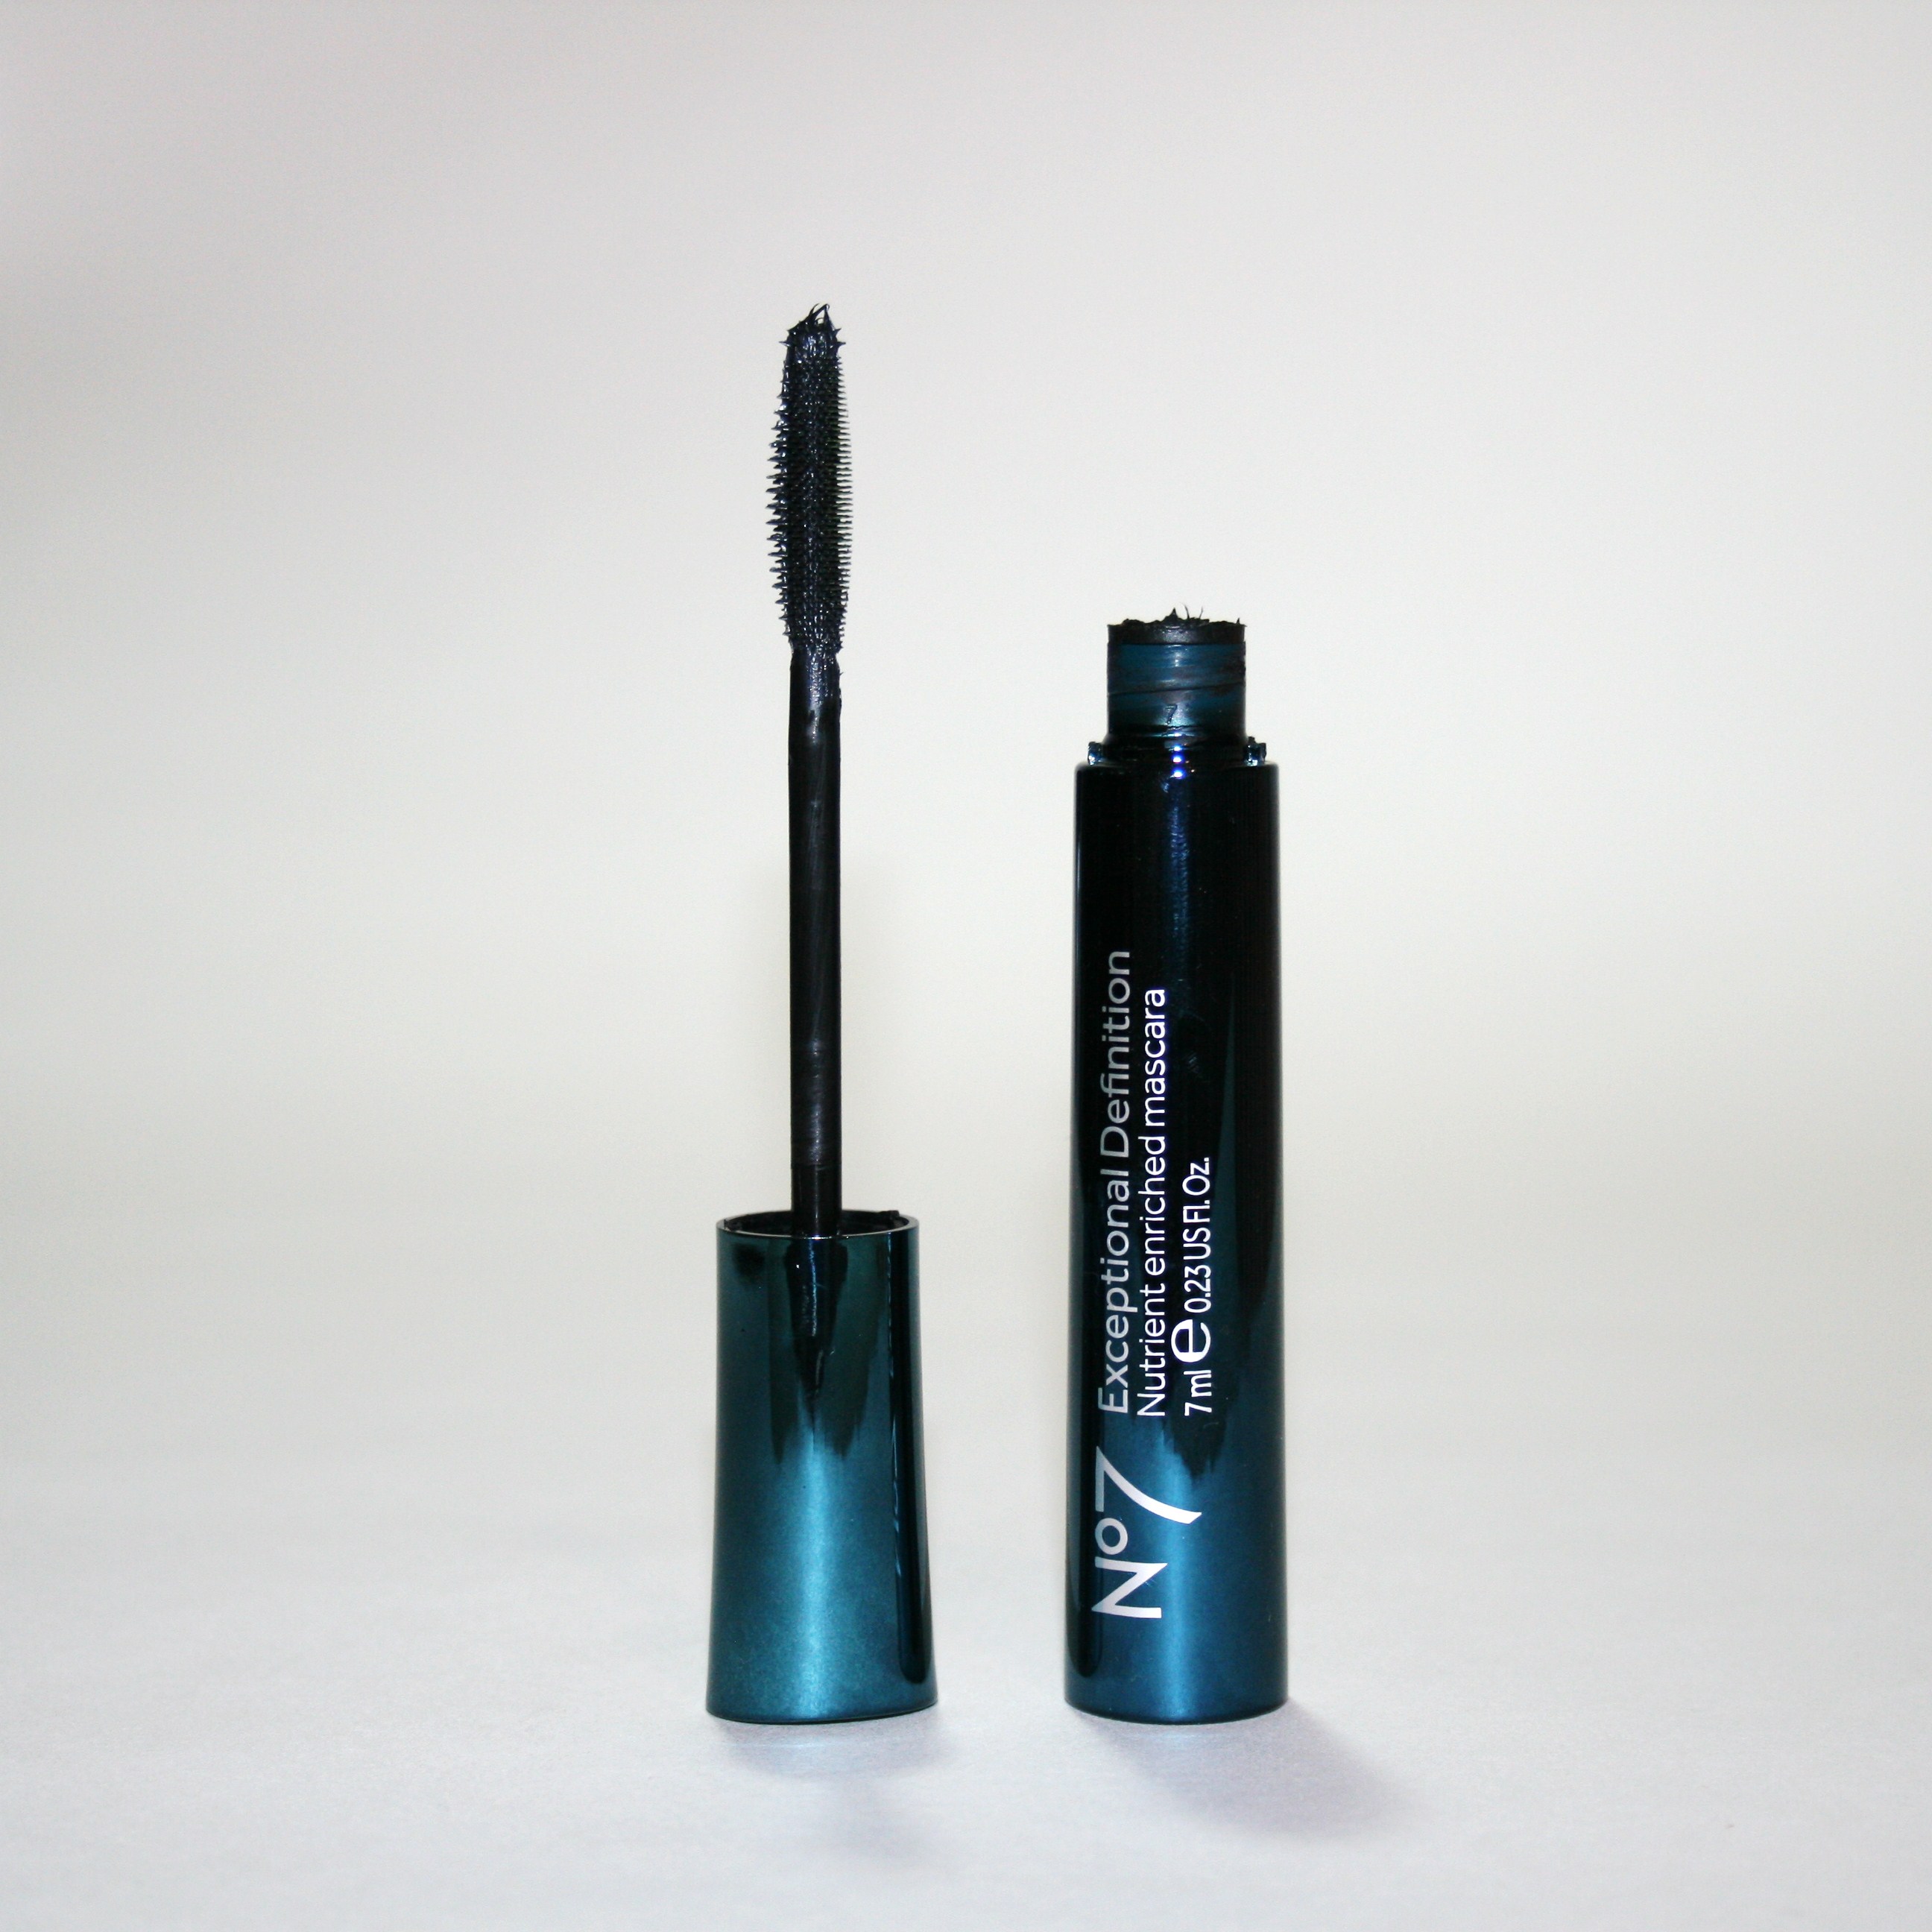 Boots No7 Exceptional Definition Mascara - Geek